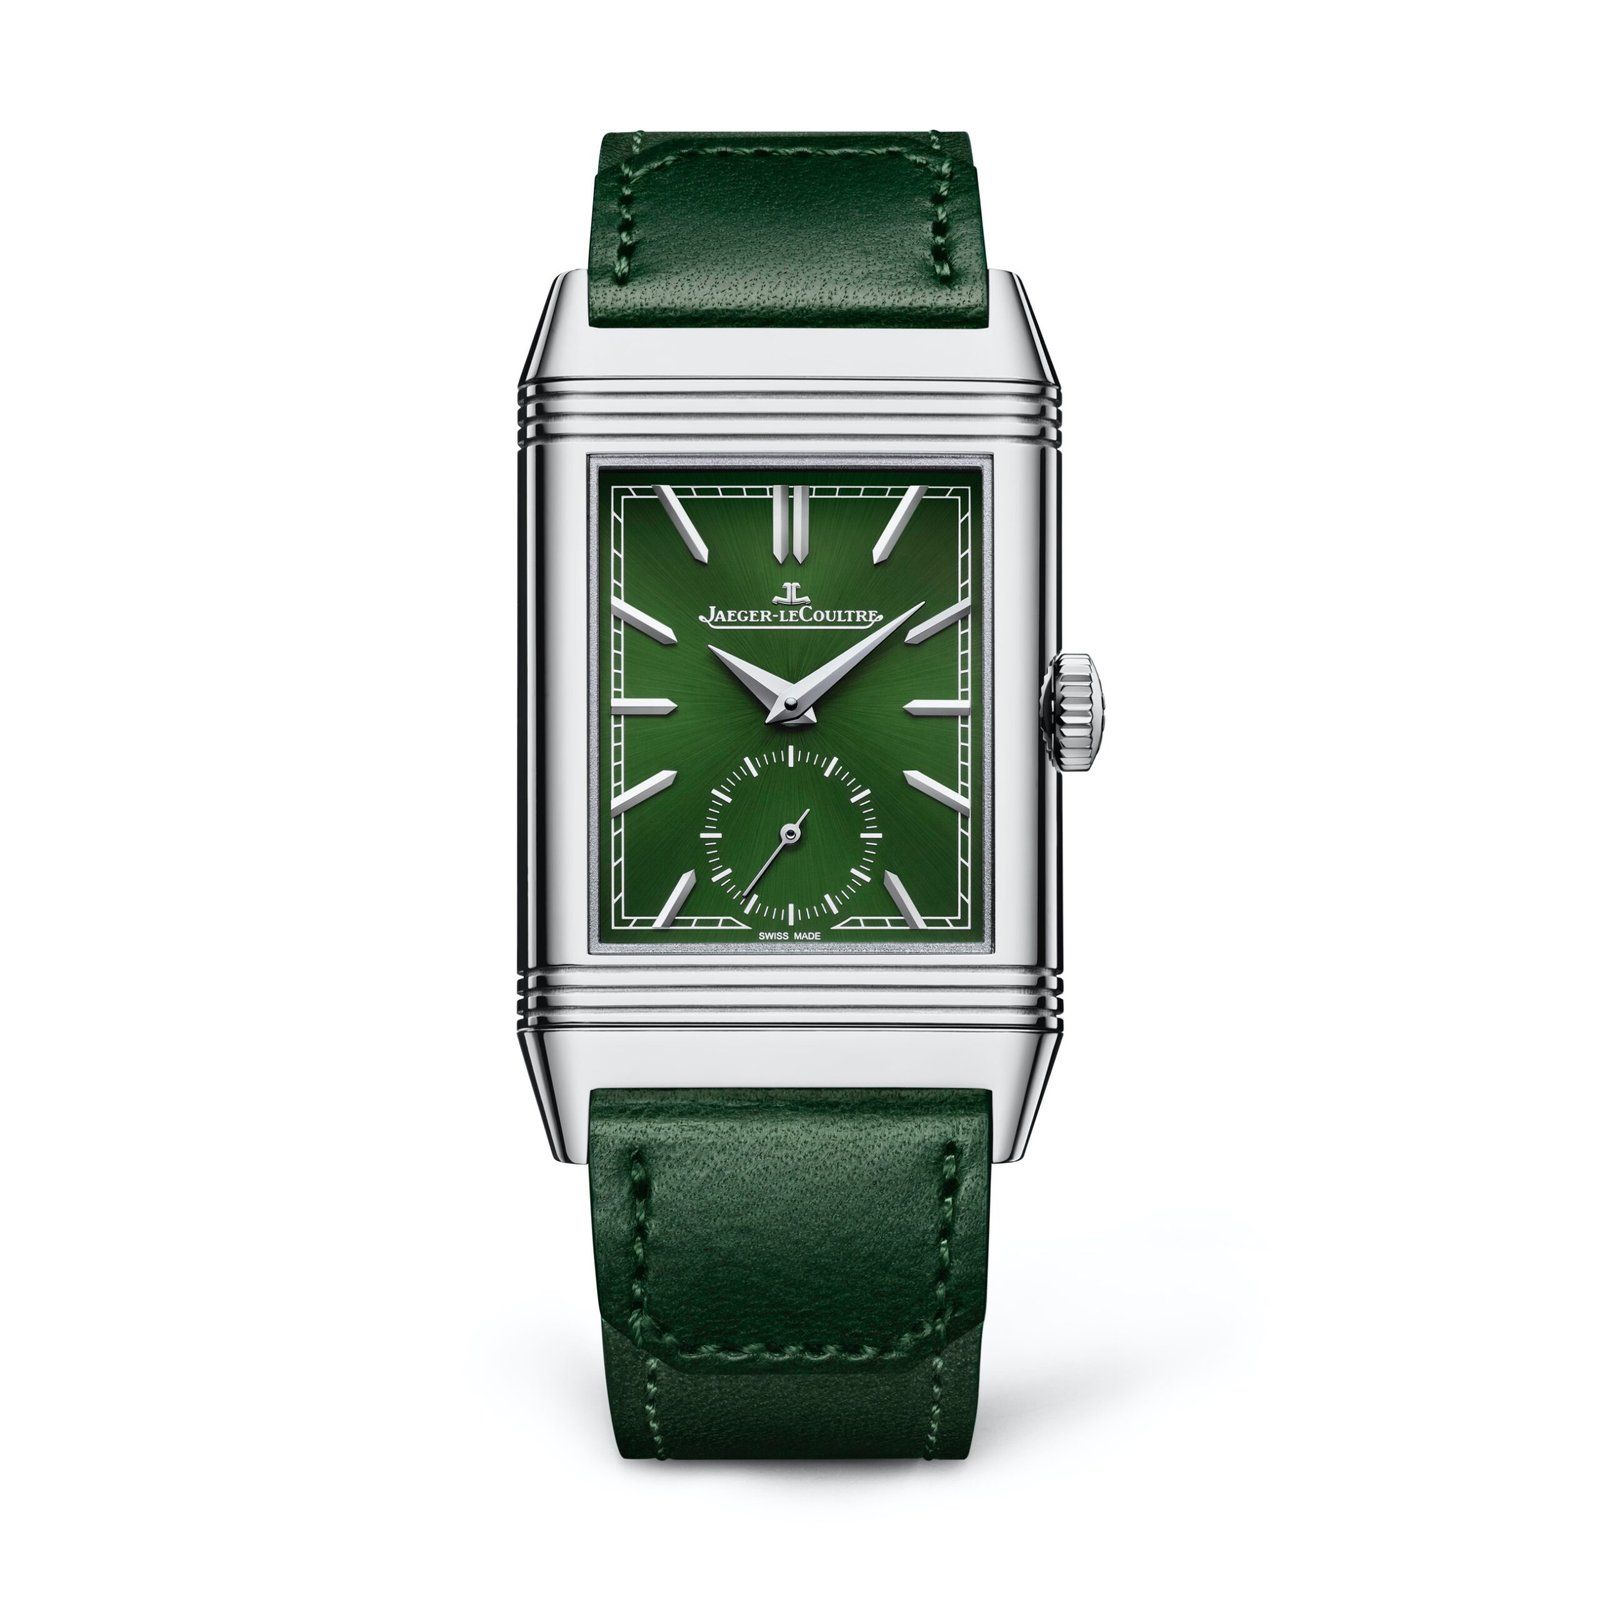 Watches & Wonders 2021: Jaeger-LeCoultre Reverso Tribute Small Seconds in Green